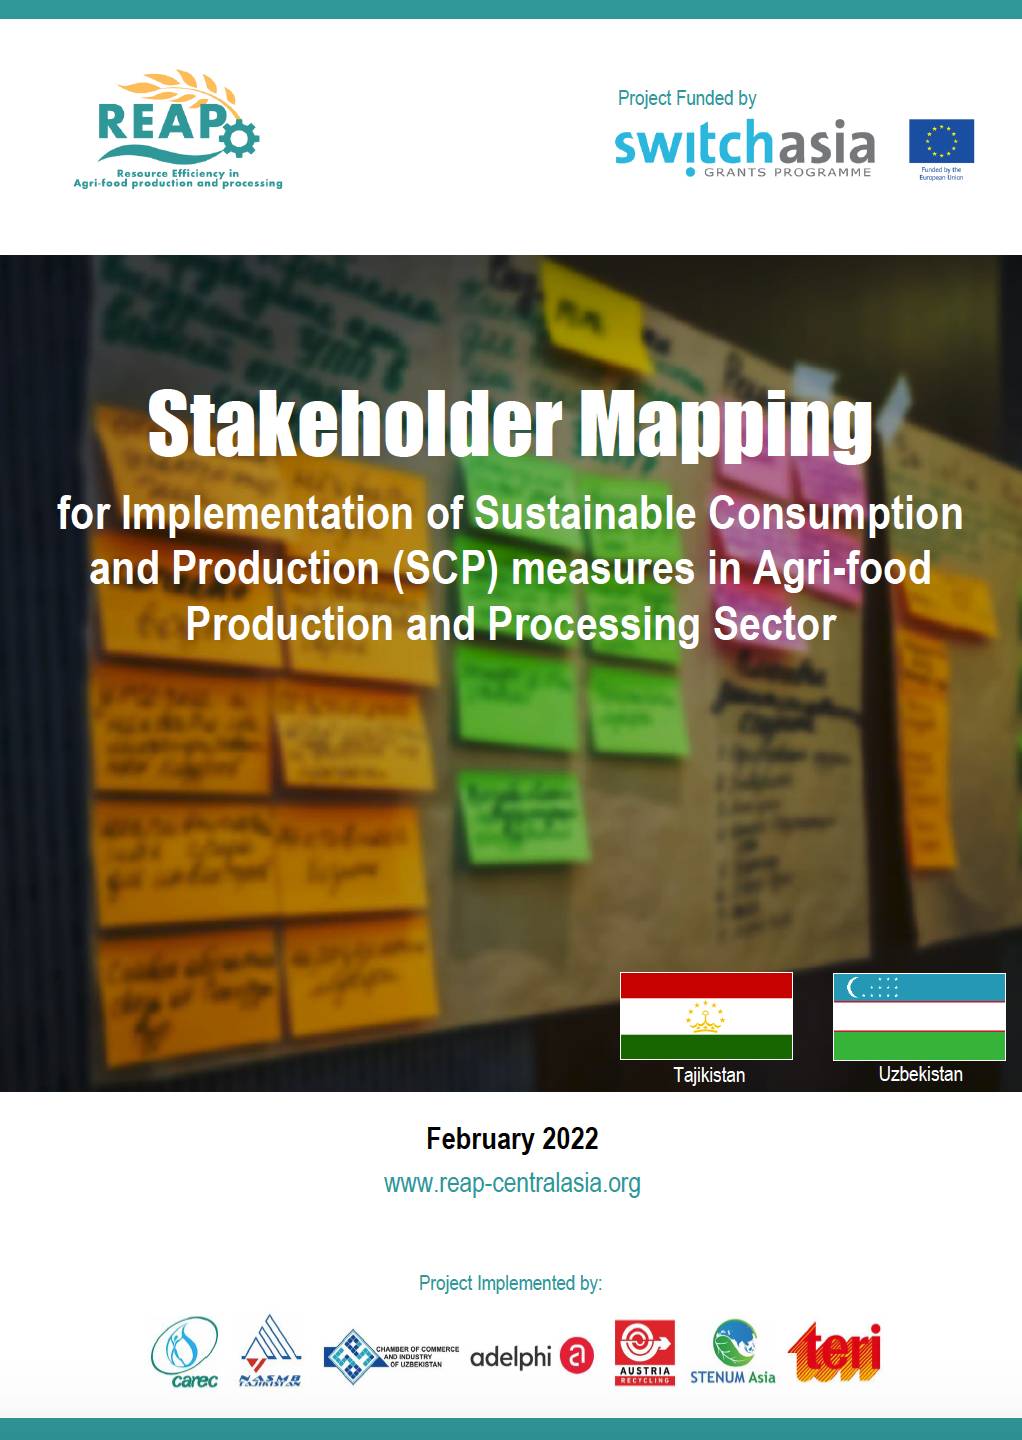 Stakeholder Mapping for the Implementation of SCP Measures in Agri-food Production and Processing Sector